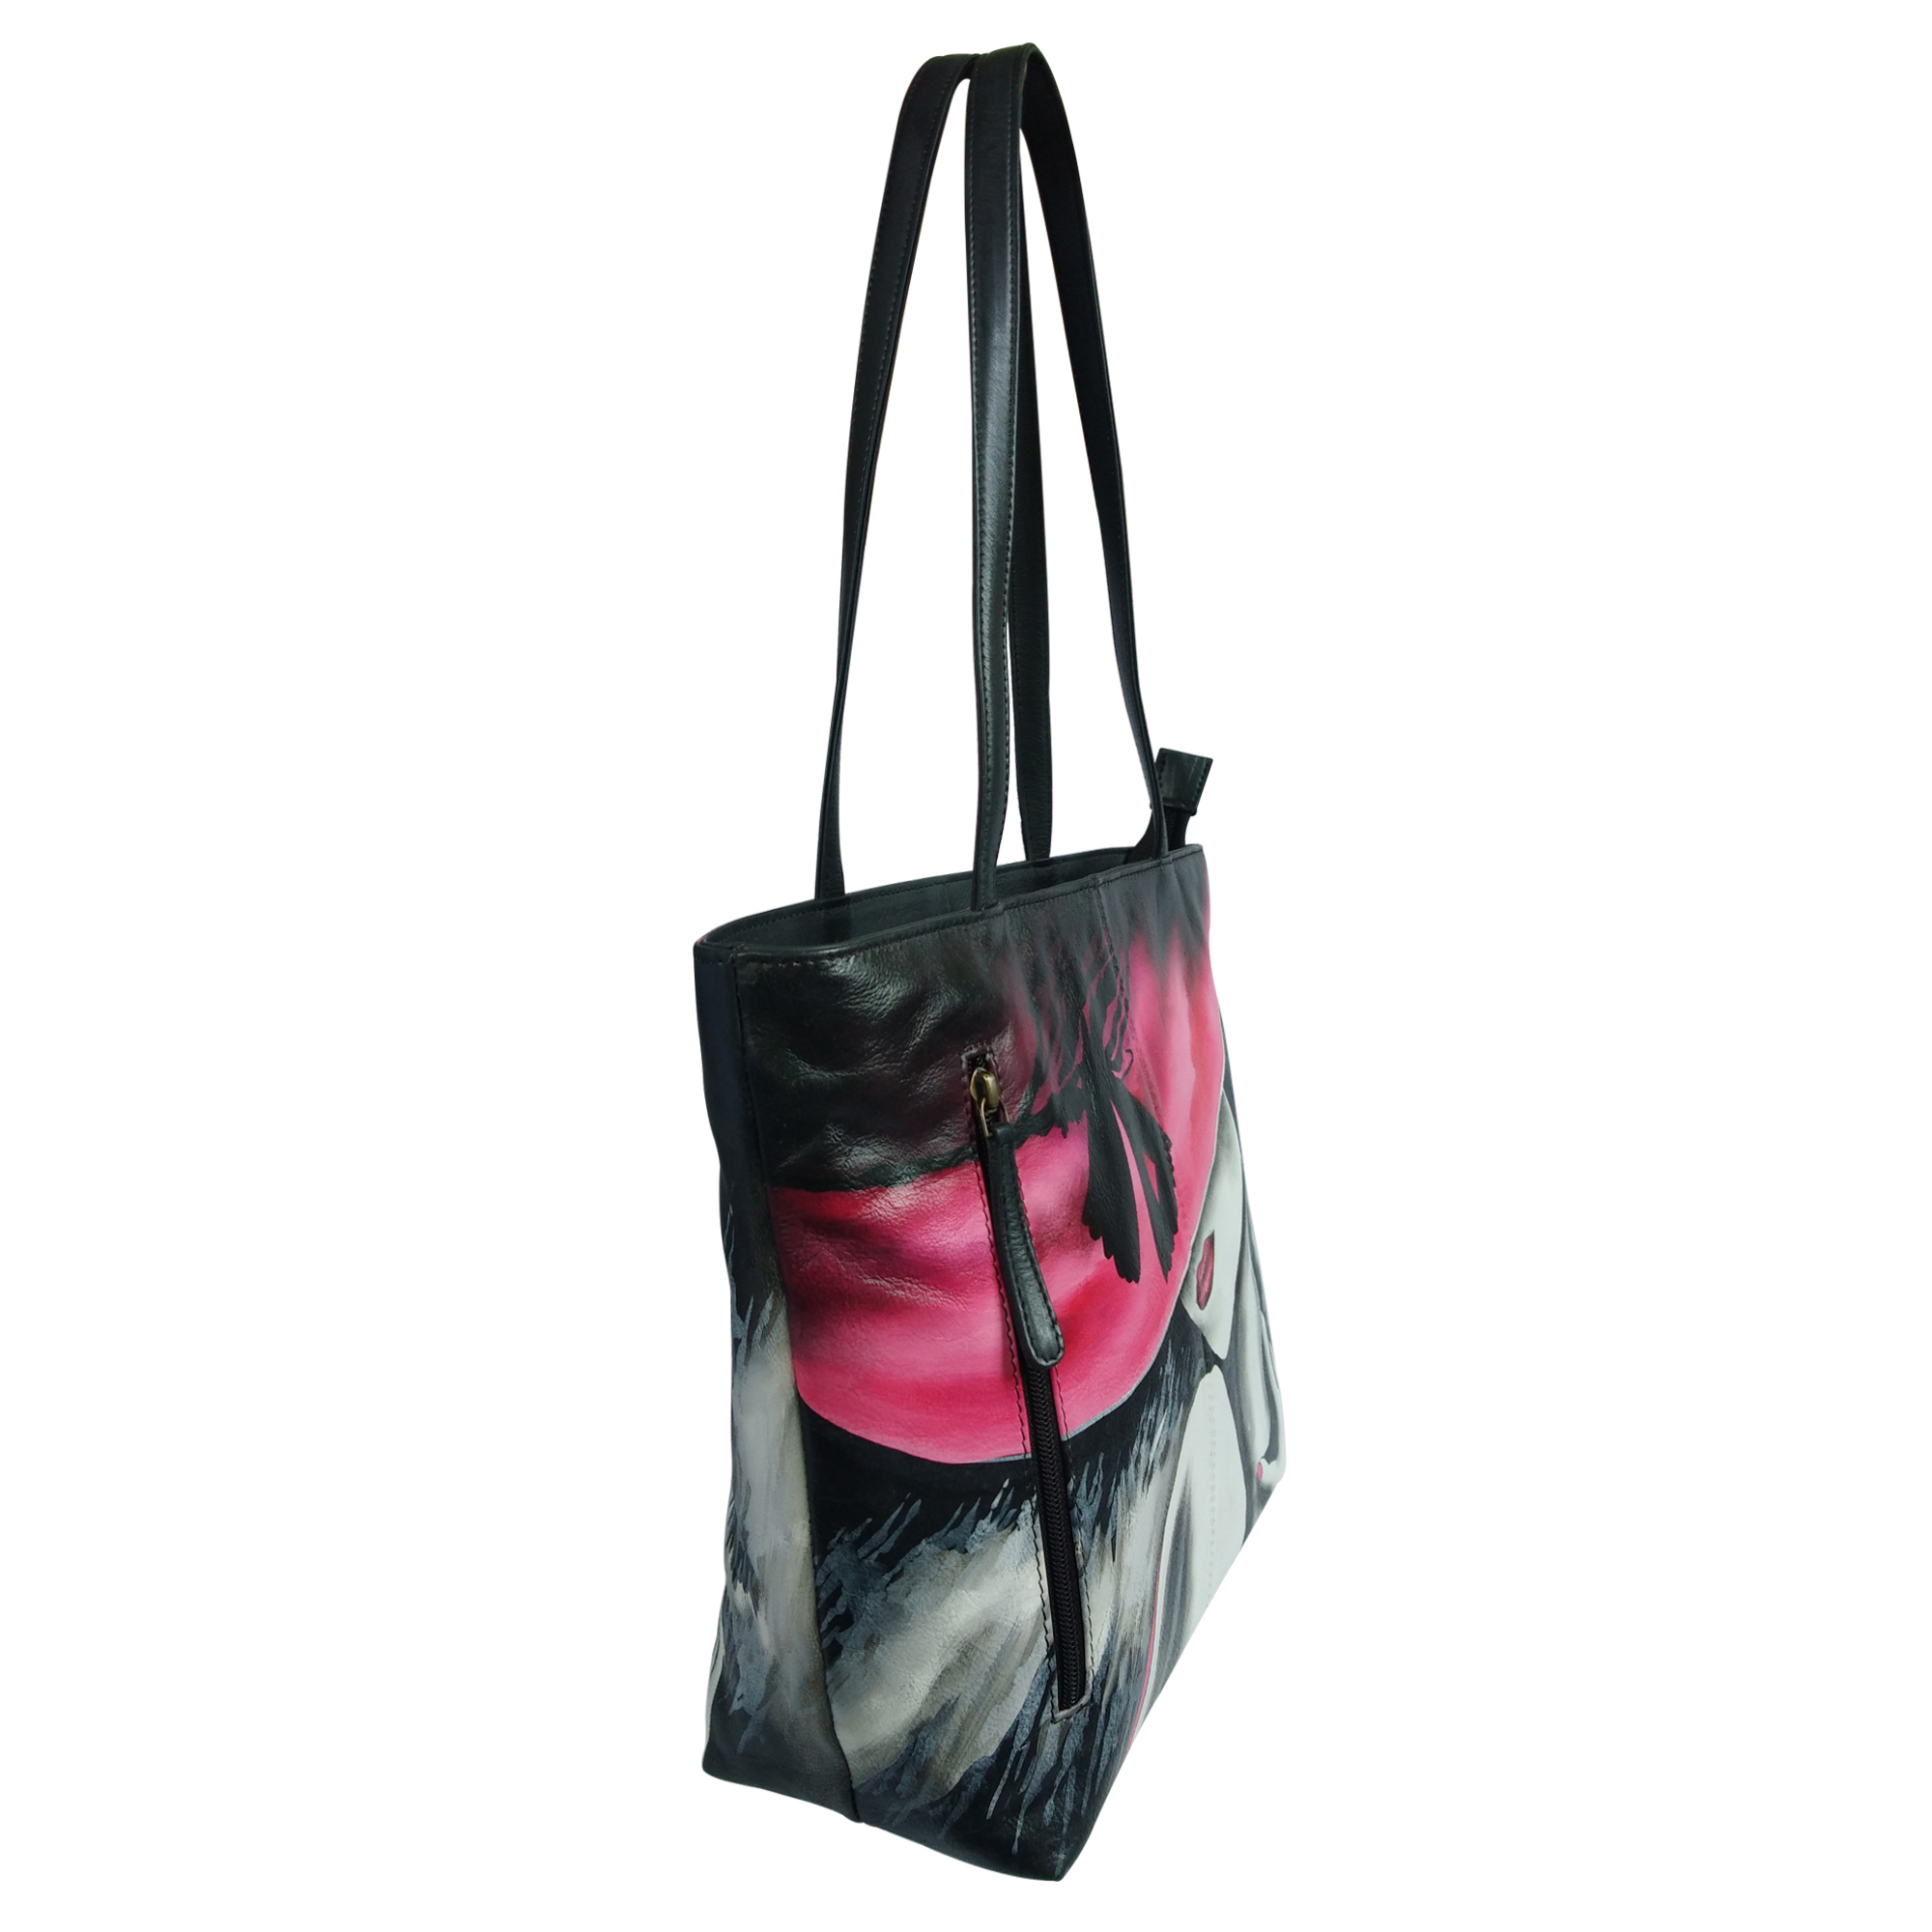 New Leather Hand Painted Tote Shoulder Bag